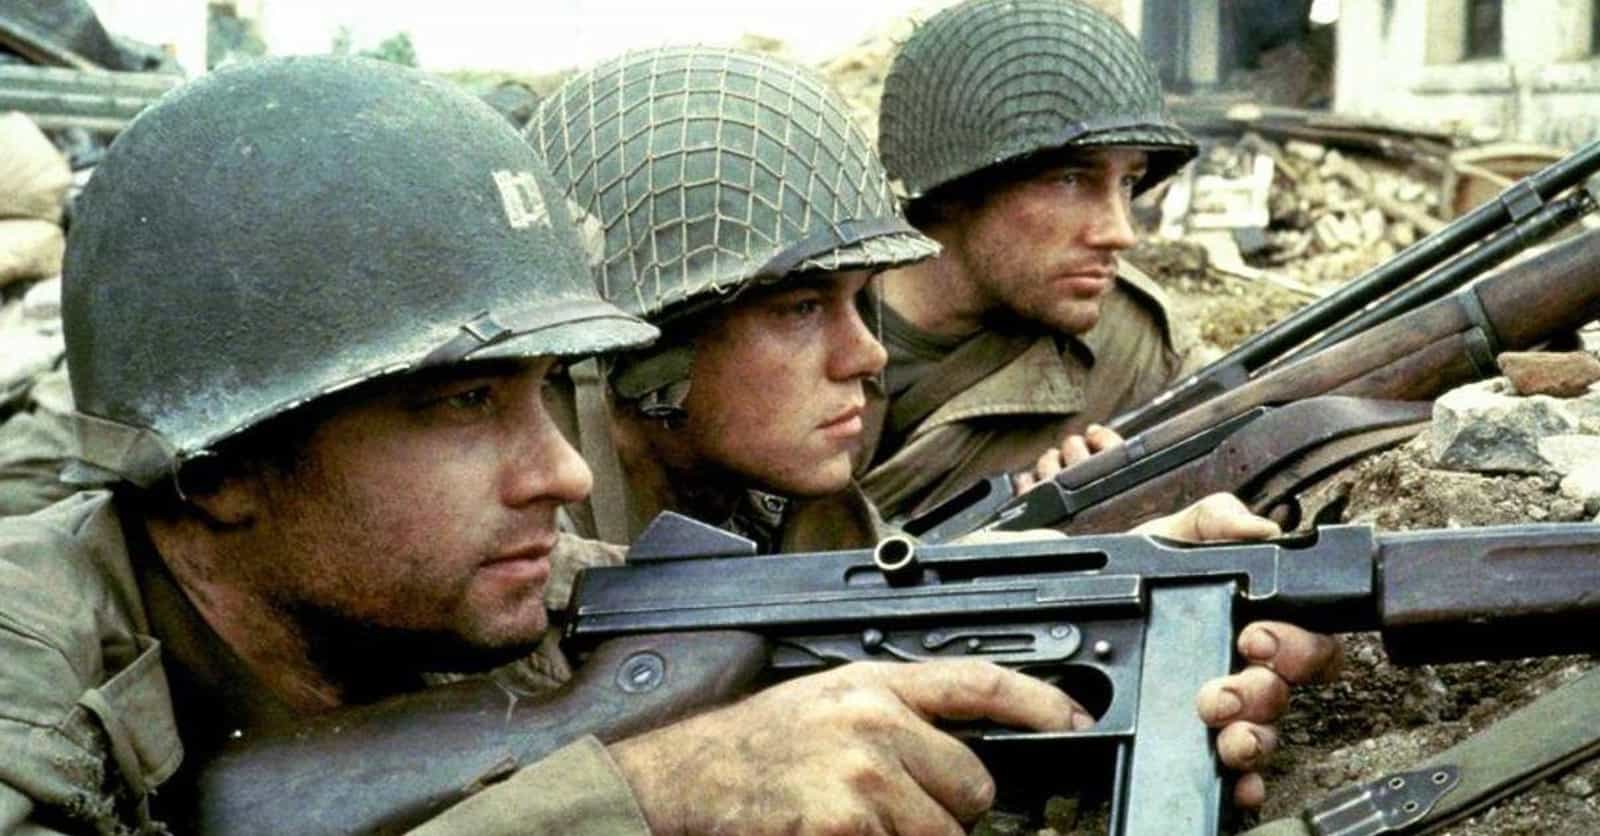 The Top 25 Must-See Quintessential War Movies